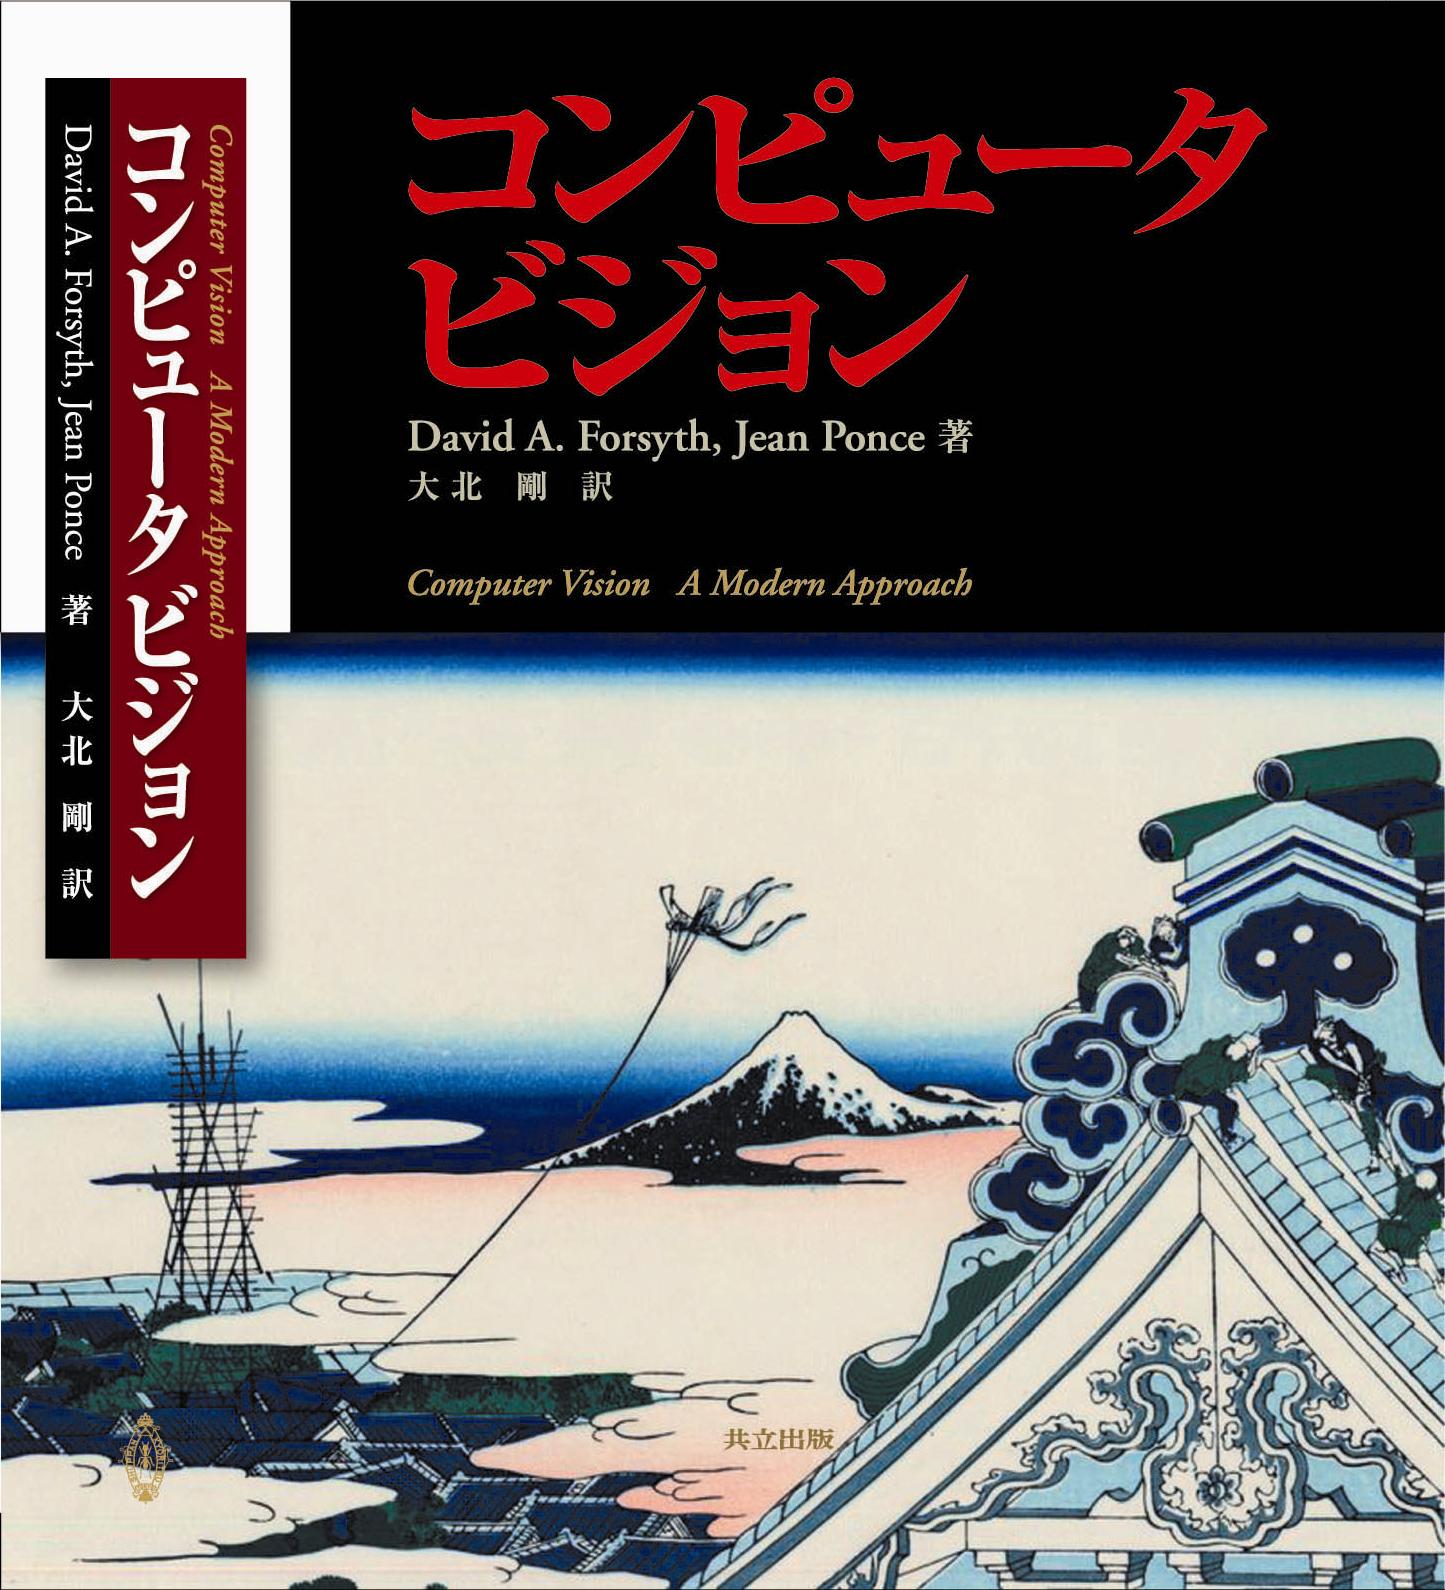 The Book -- in Japanese